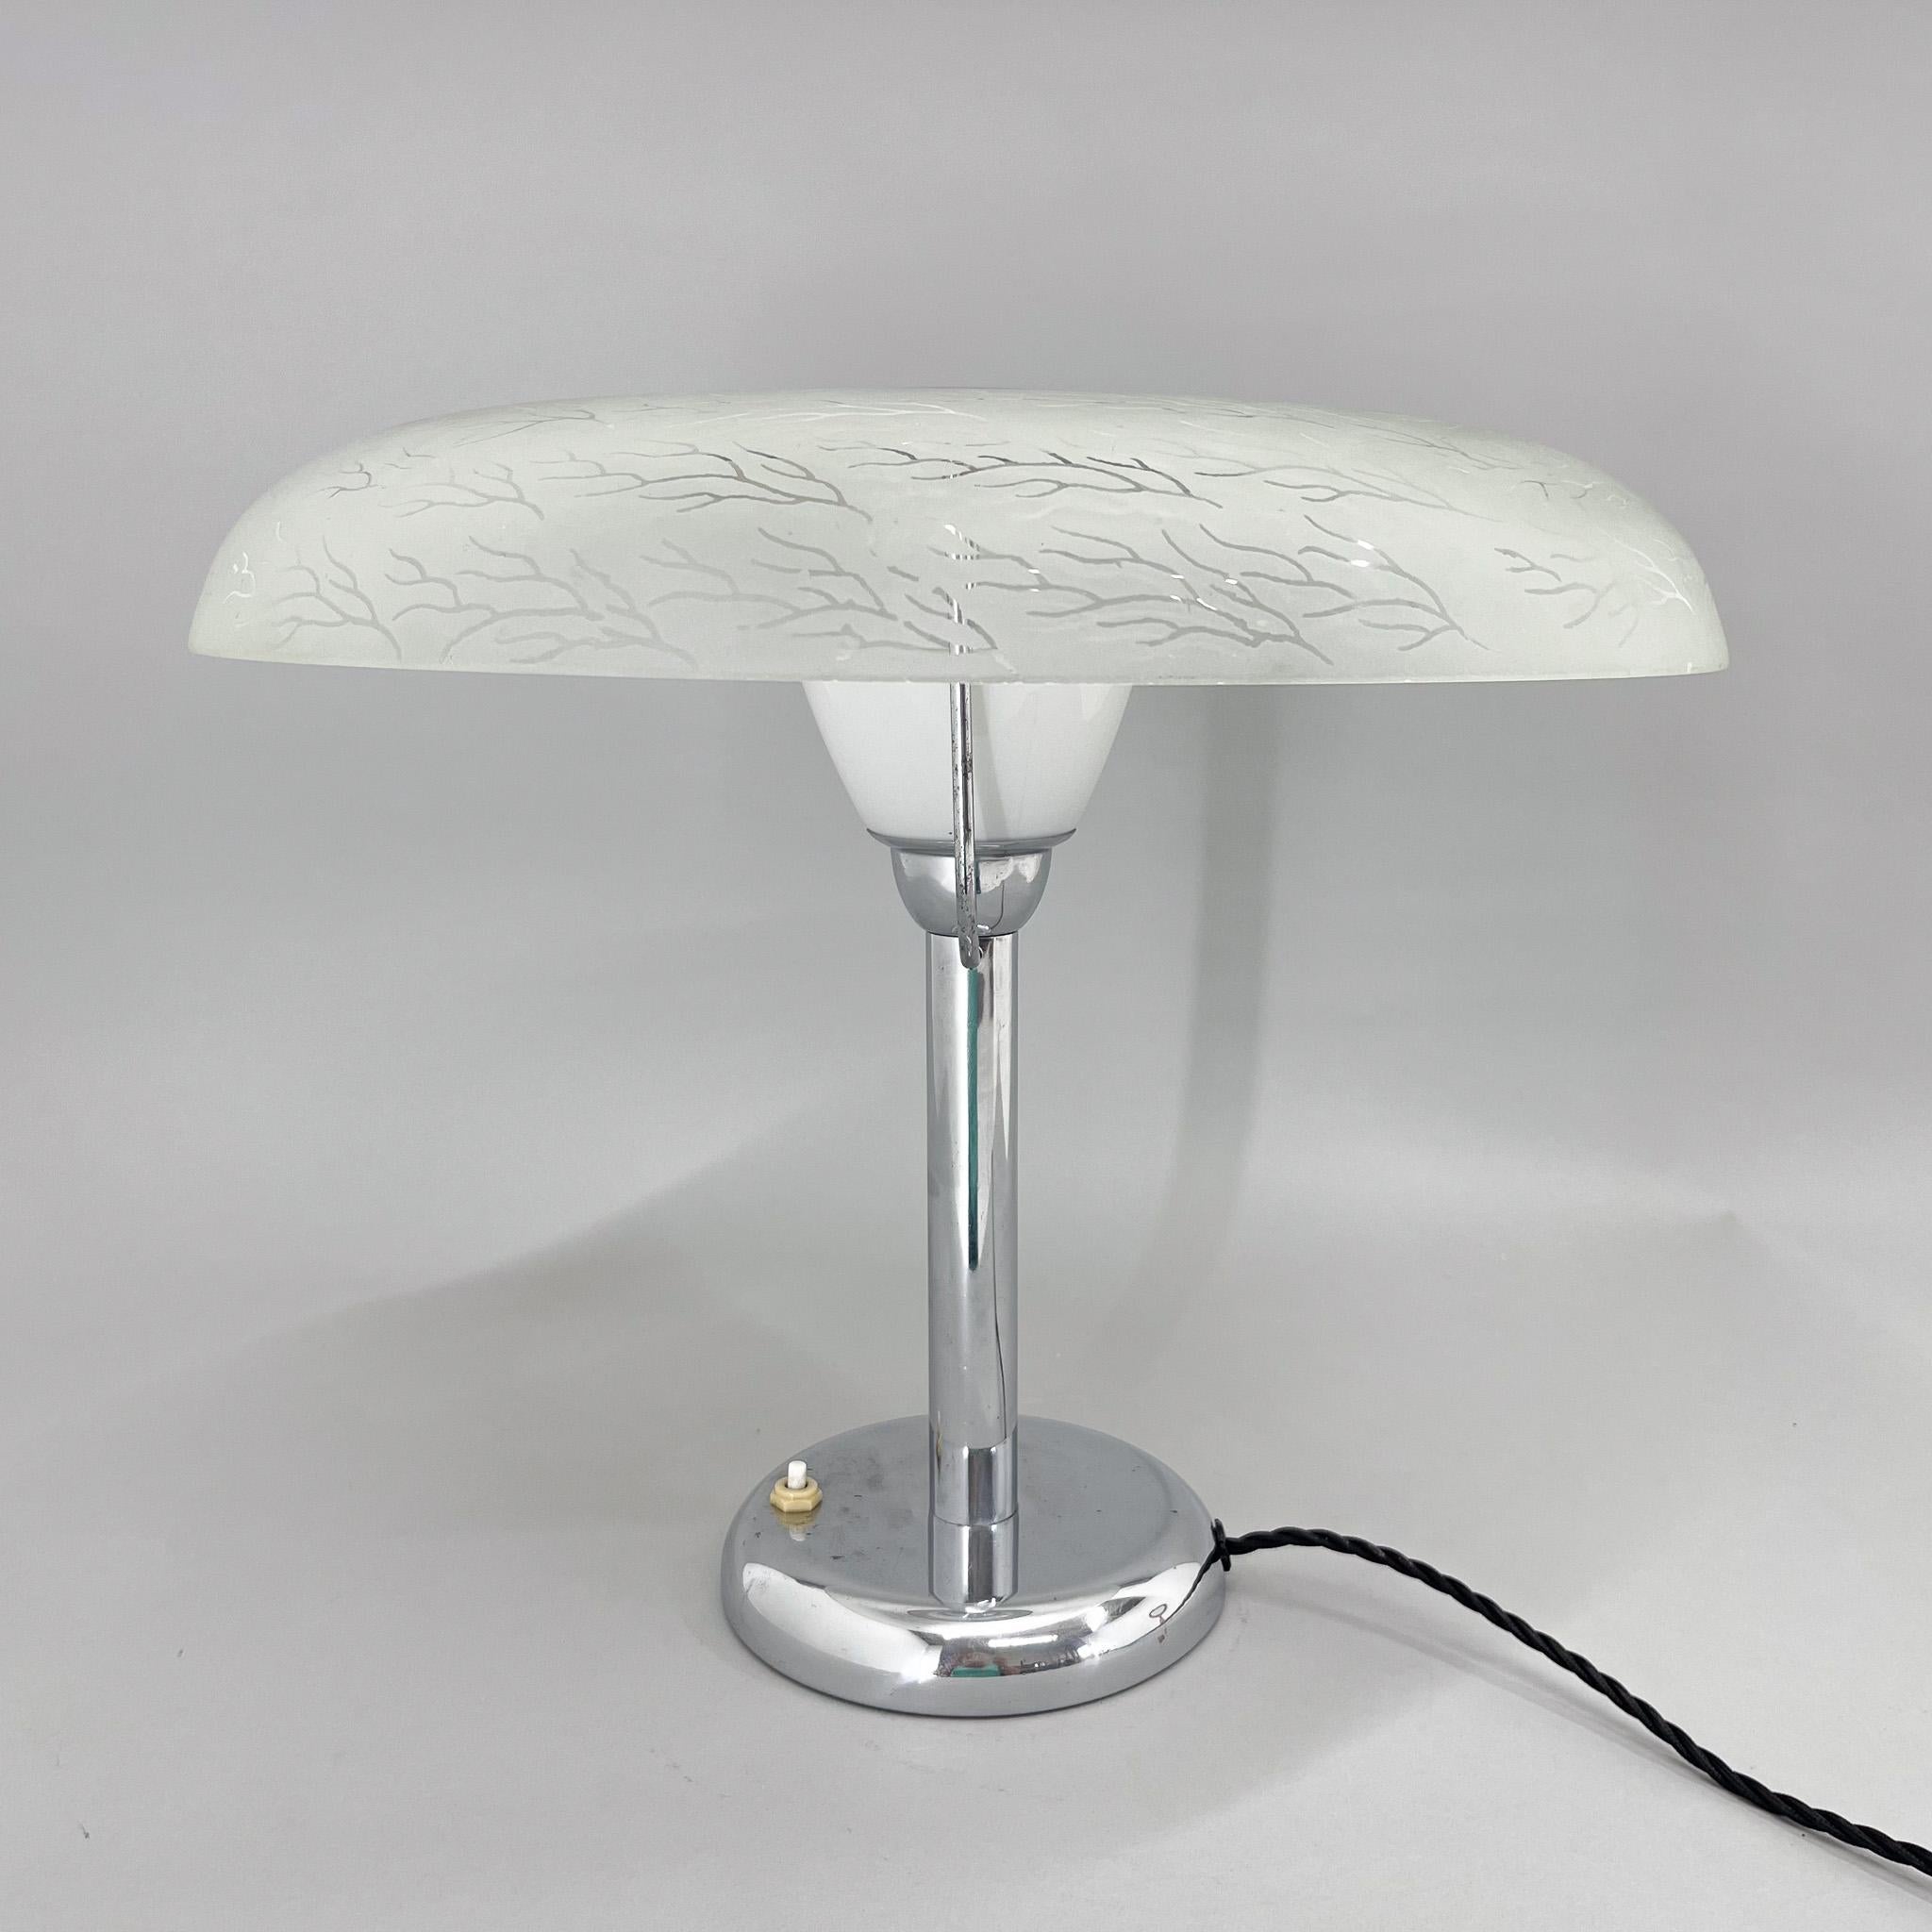 Bauhaus or functionalist large table lamp made of chrome and beautiful, unique glass lamp shade. 
Restored, rewired. Bulb: 1 x E25-E27. US plug adapter included.